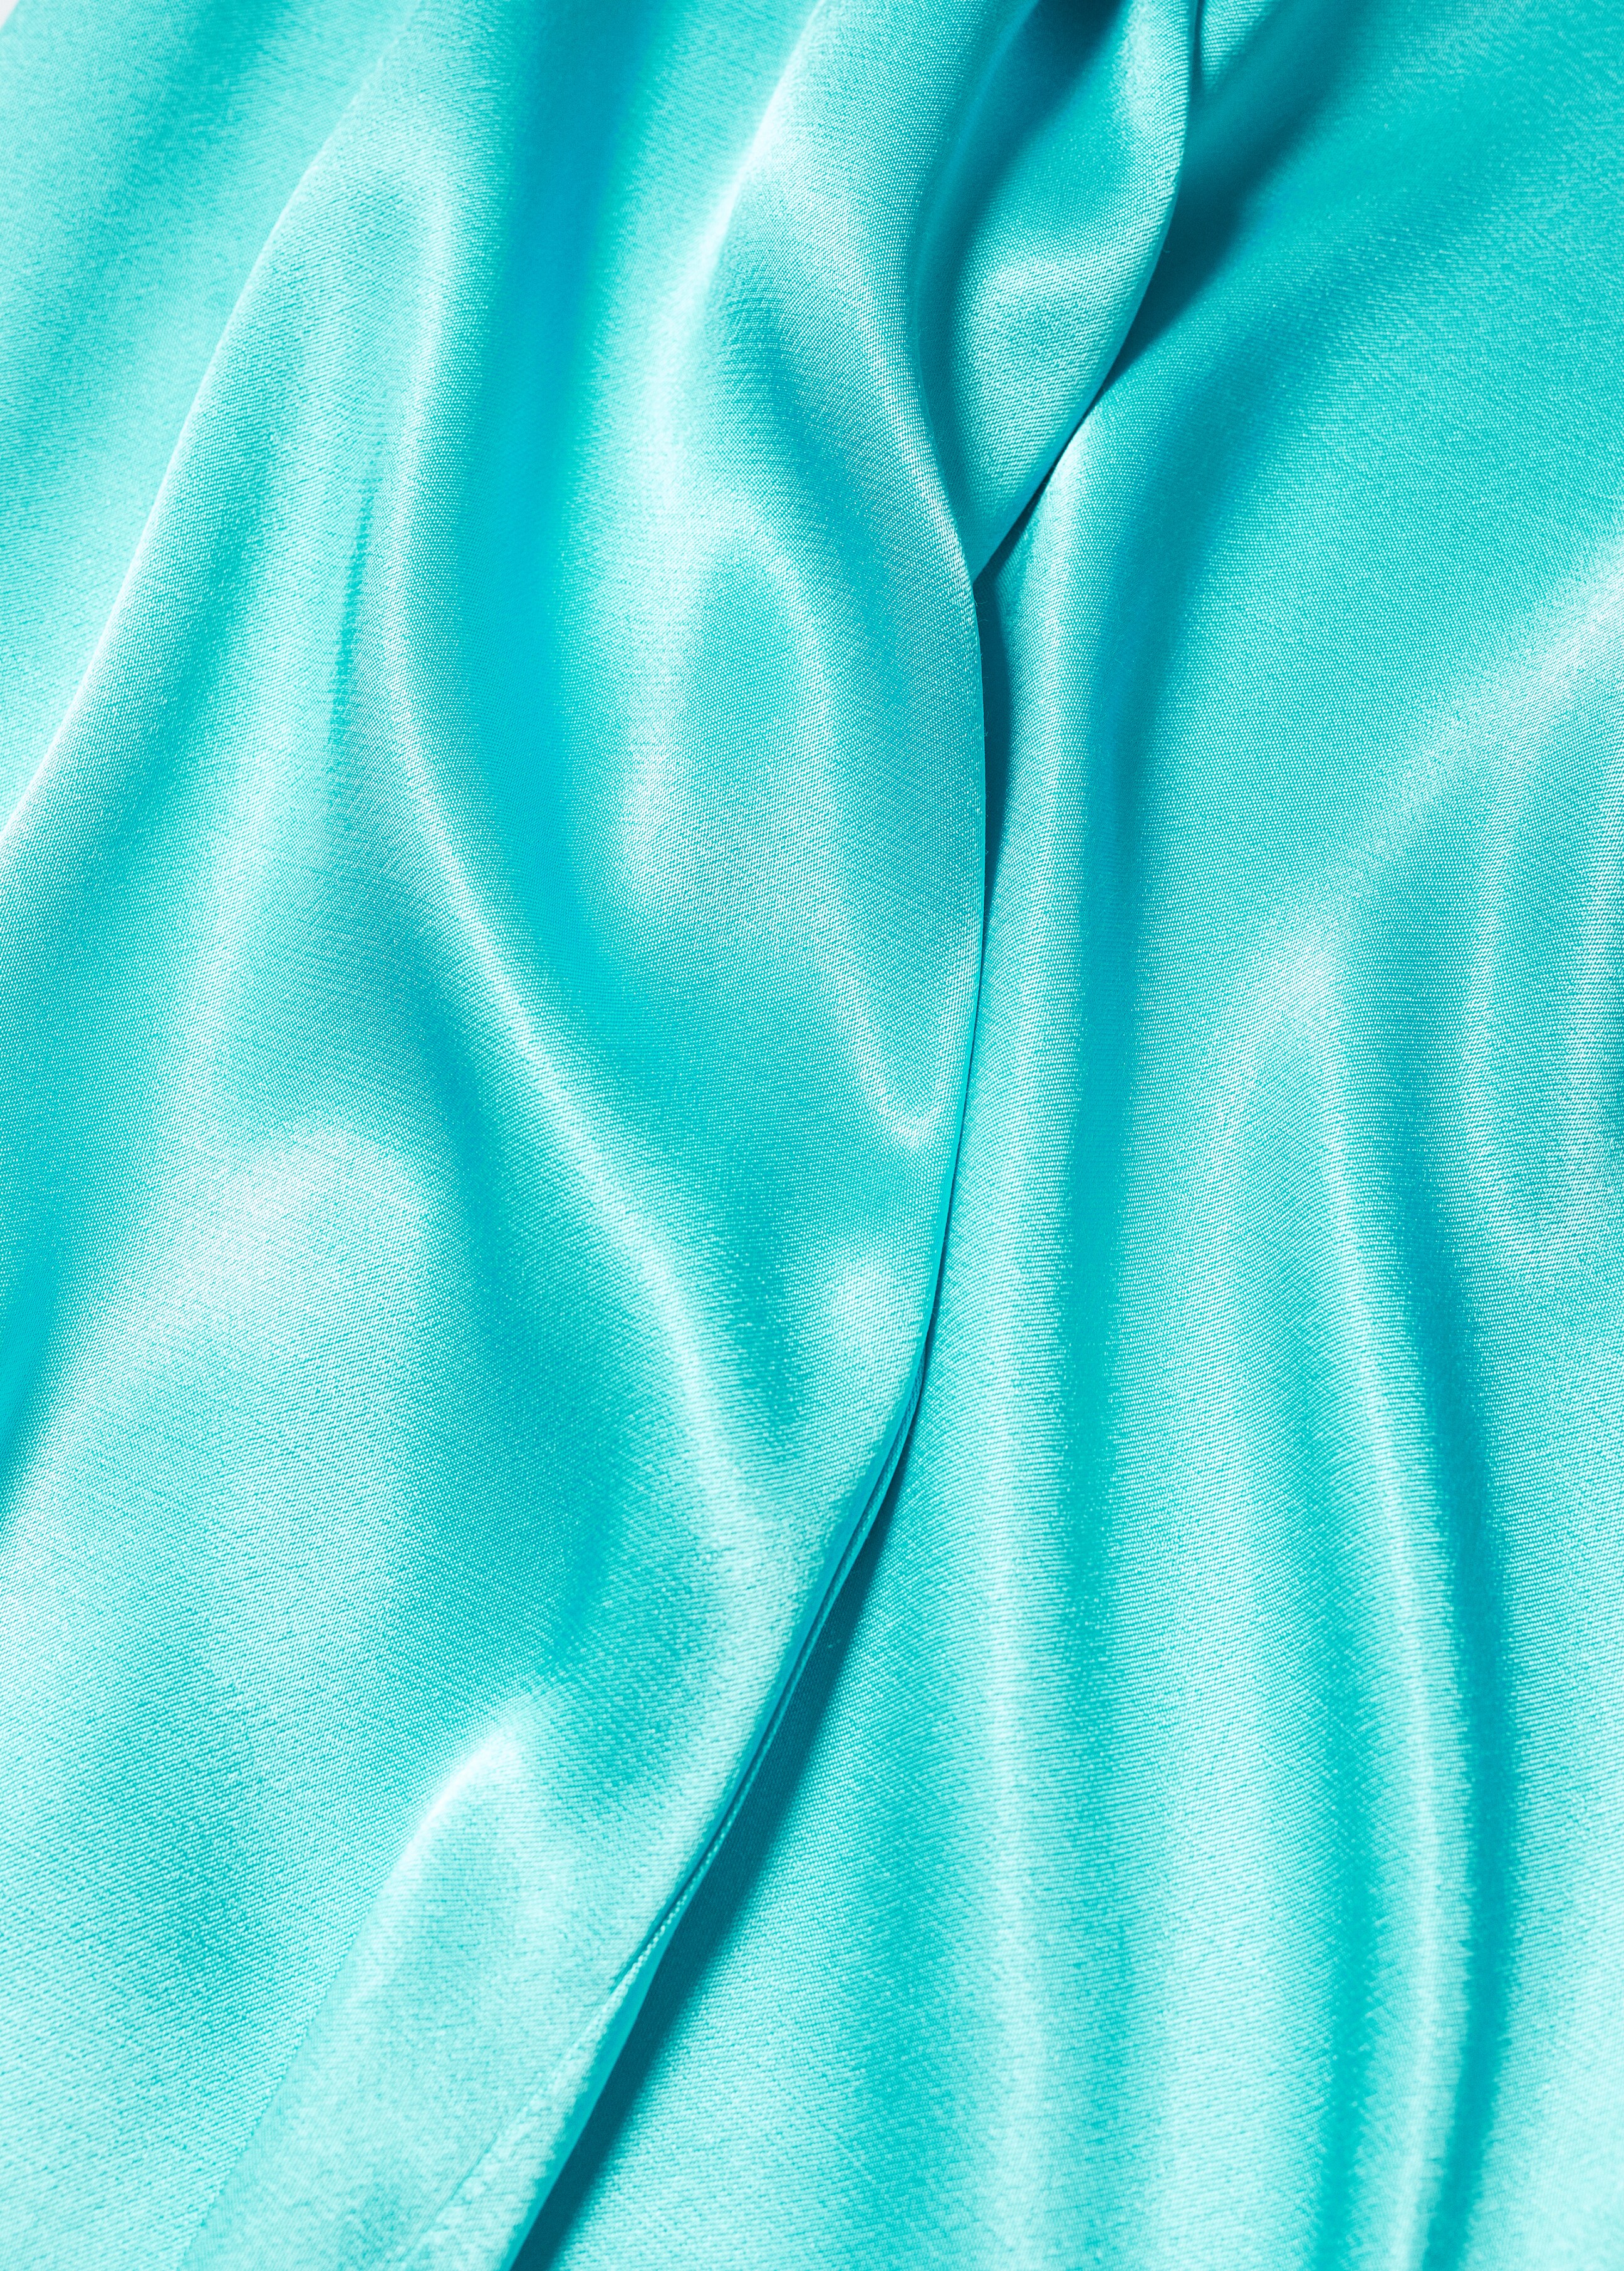 Satin palazzo pants - Details of the article 8